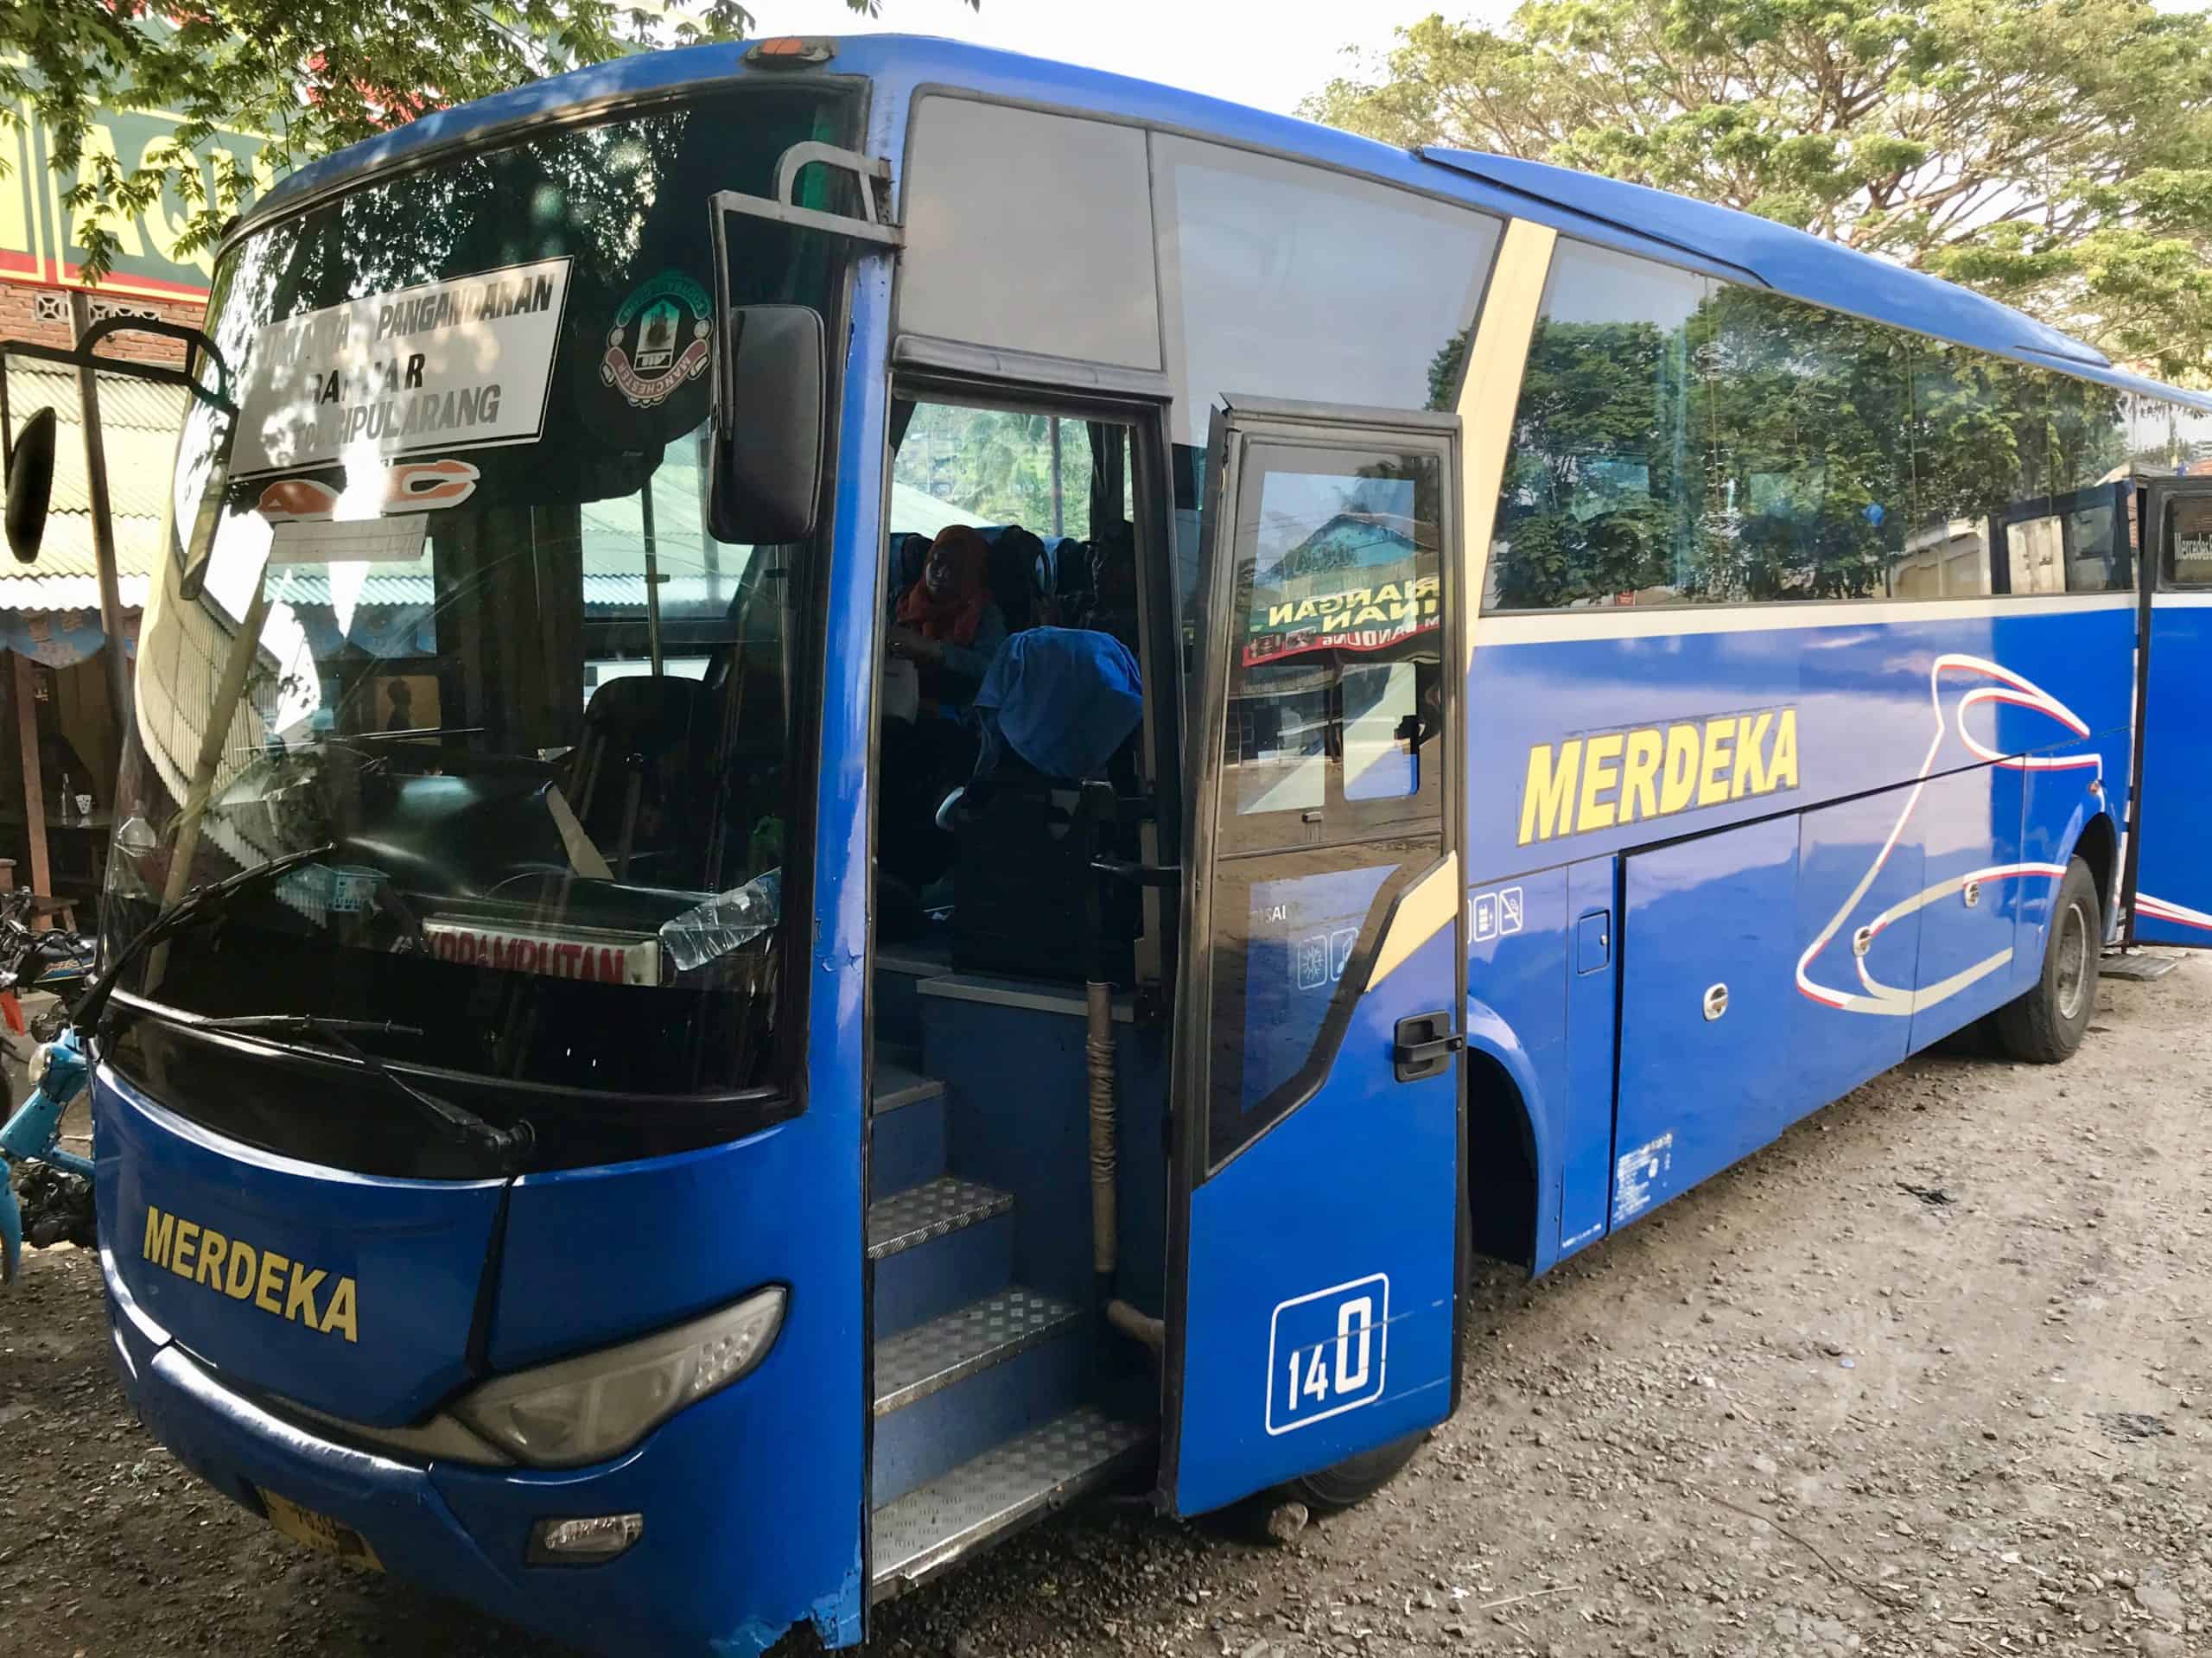 Merdeka bus company will get you from Jakarta to Pangandaran in West Java Indonesia